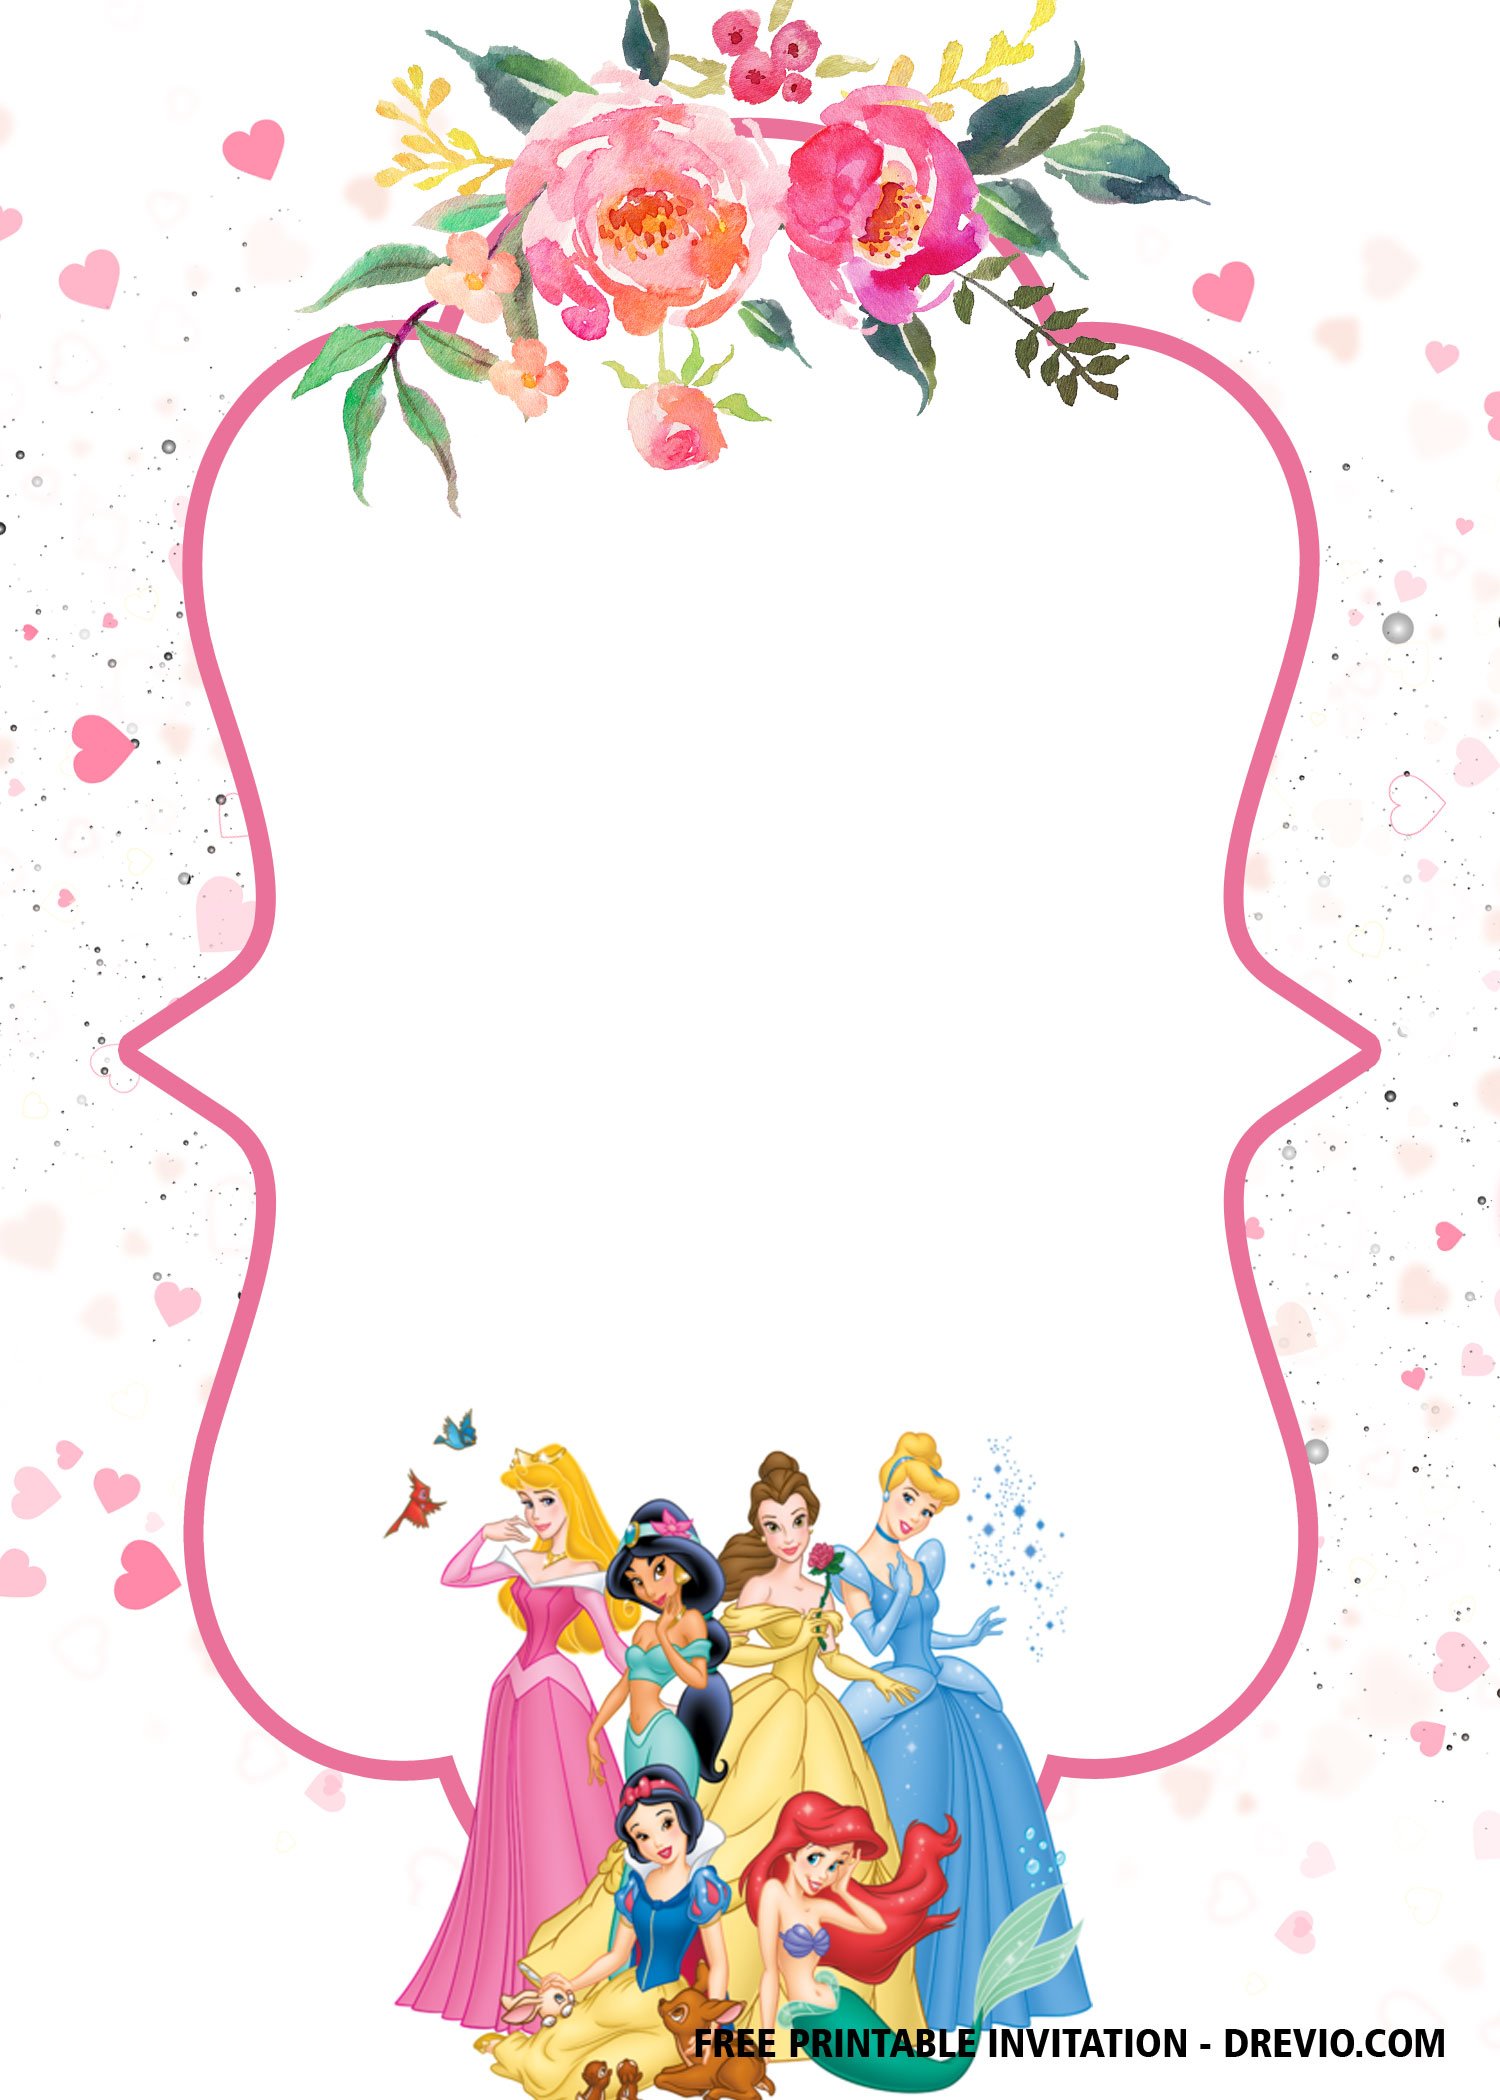 FREE Disney Princess Invitation Template for Your Little Girl s